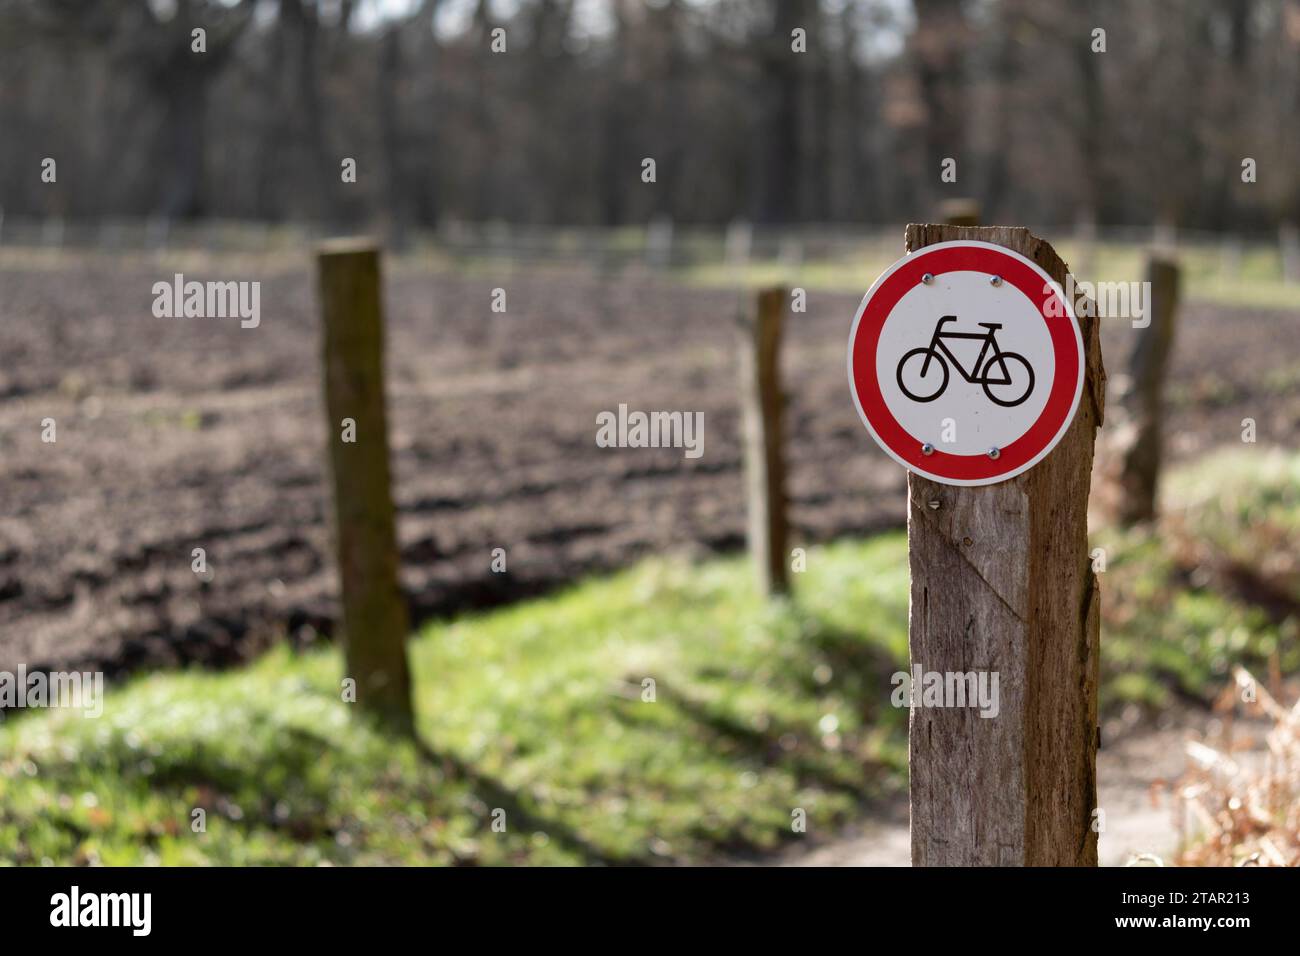 Warning sign no cycling on a country lane in the Duvenstedter Brook nature reserve, Wohldorf-Ohlstedt, Hamburg, Germany Stock Photo